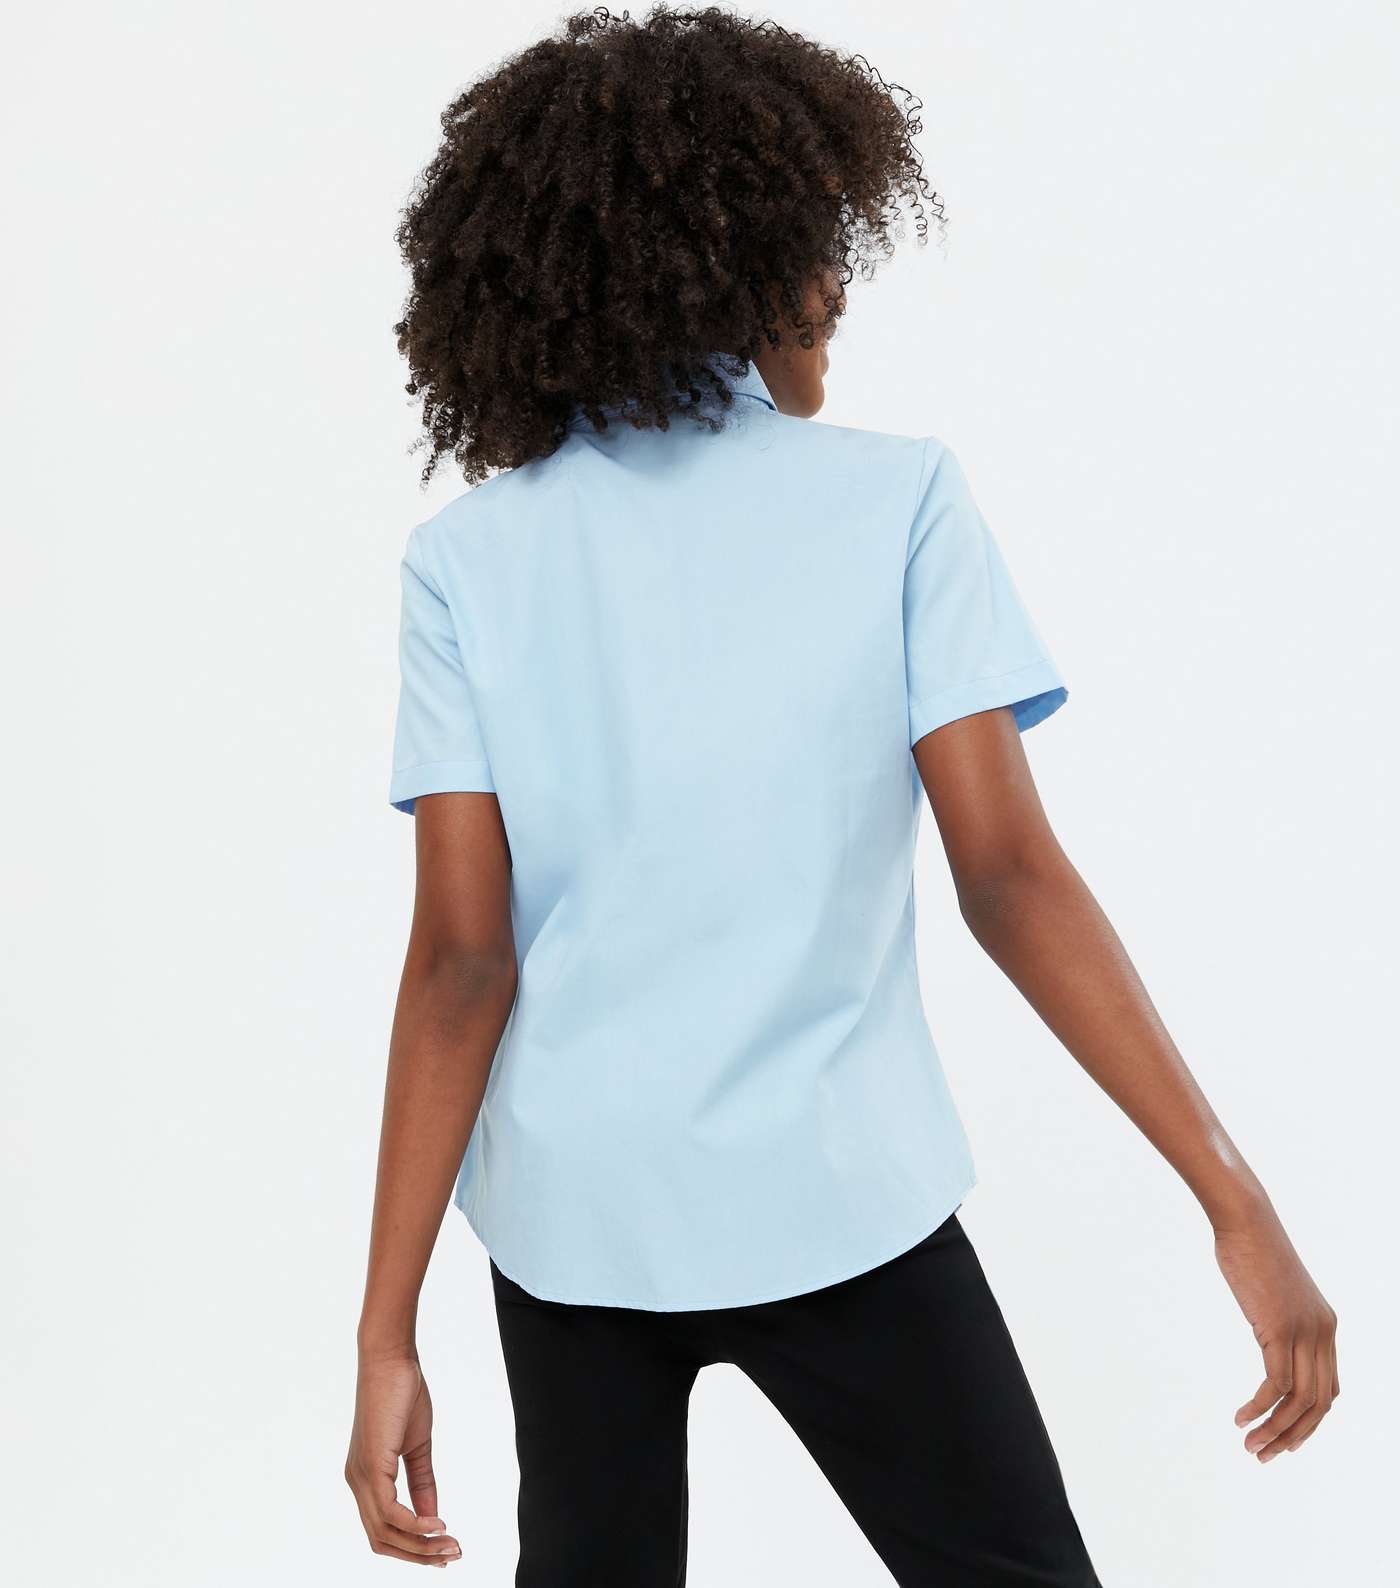 Girls 2 Pack Pale Blue Collared Short Sleeve Shirts Image 4